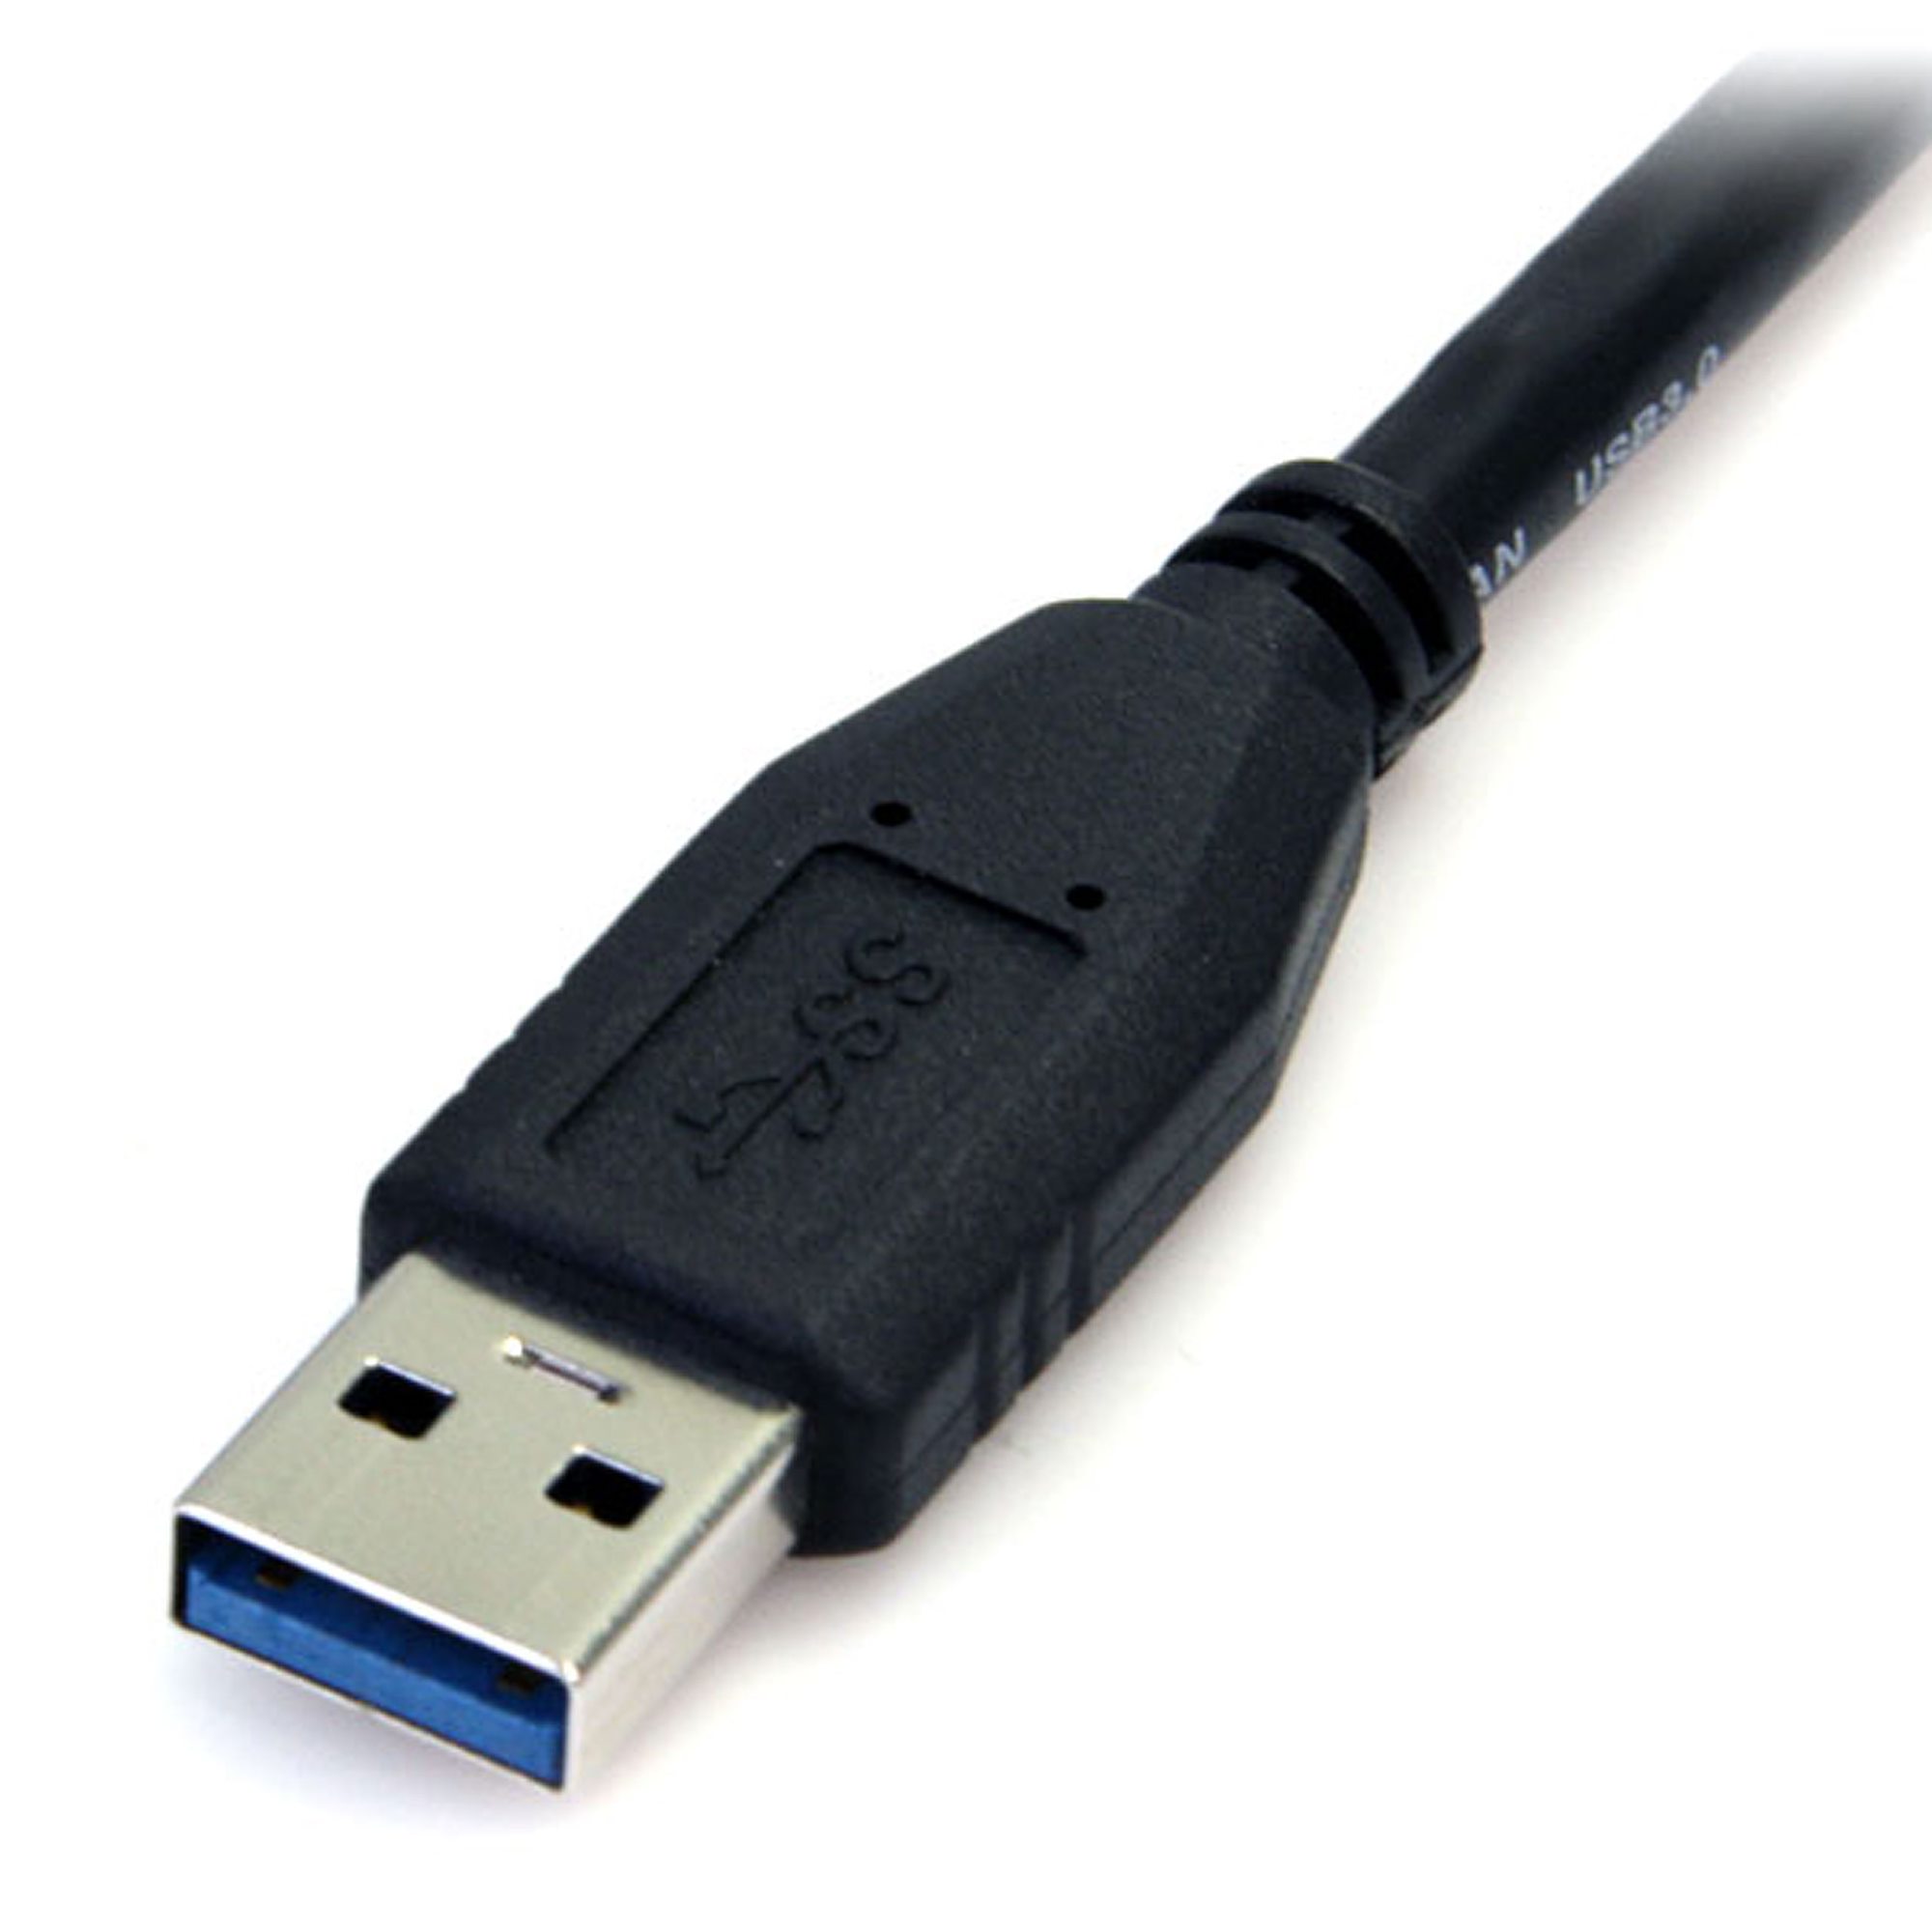 3 ft Black USB 3 Cable A to Micro B M/M - USB 3.0 Cables, Cables